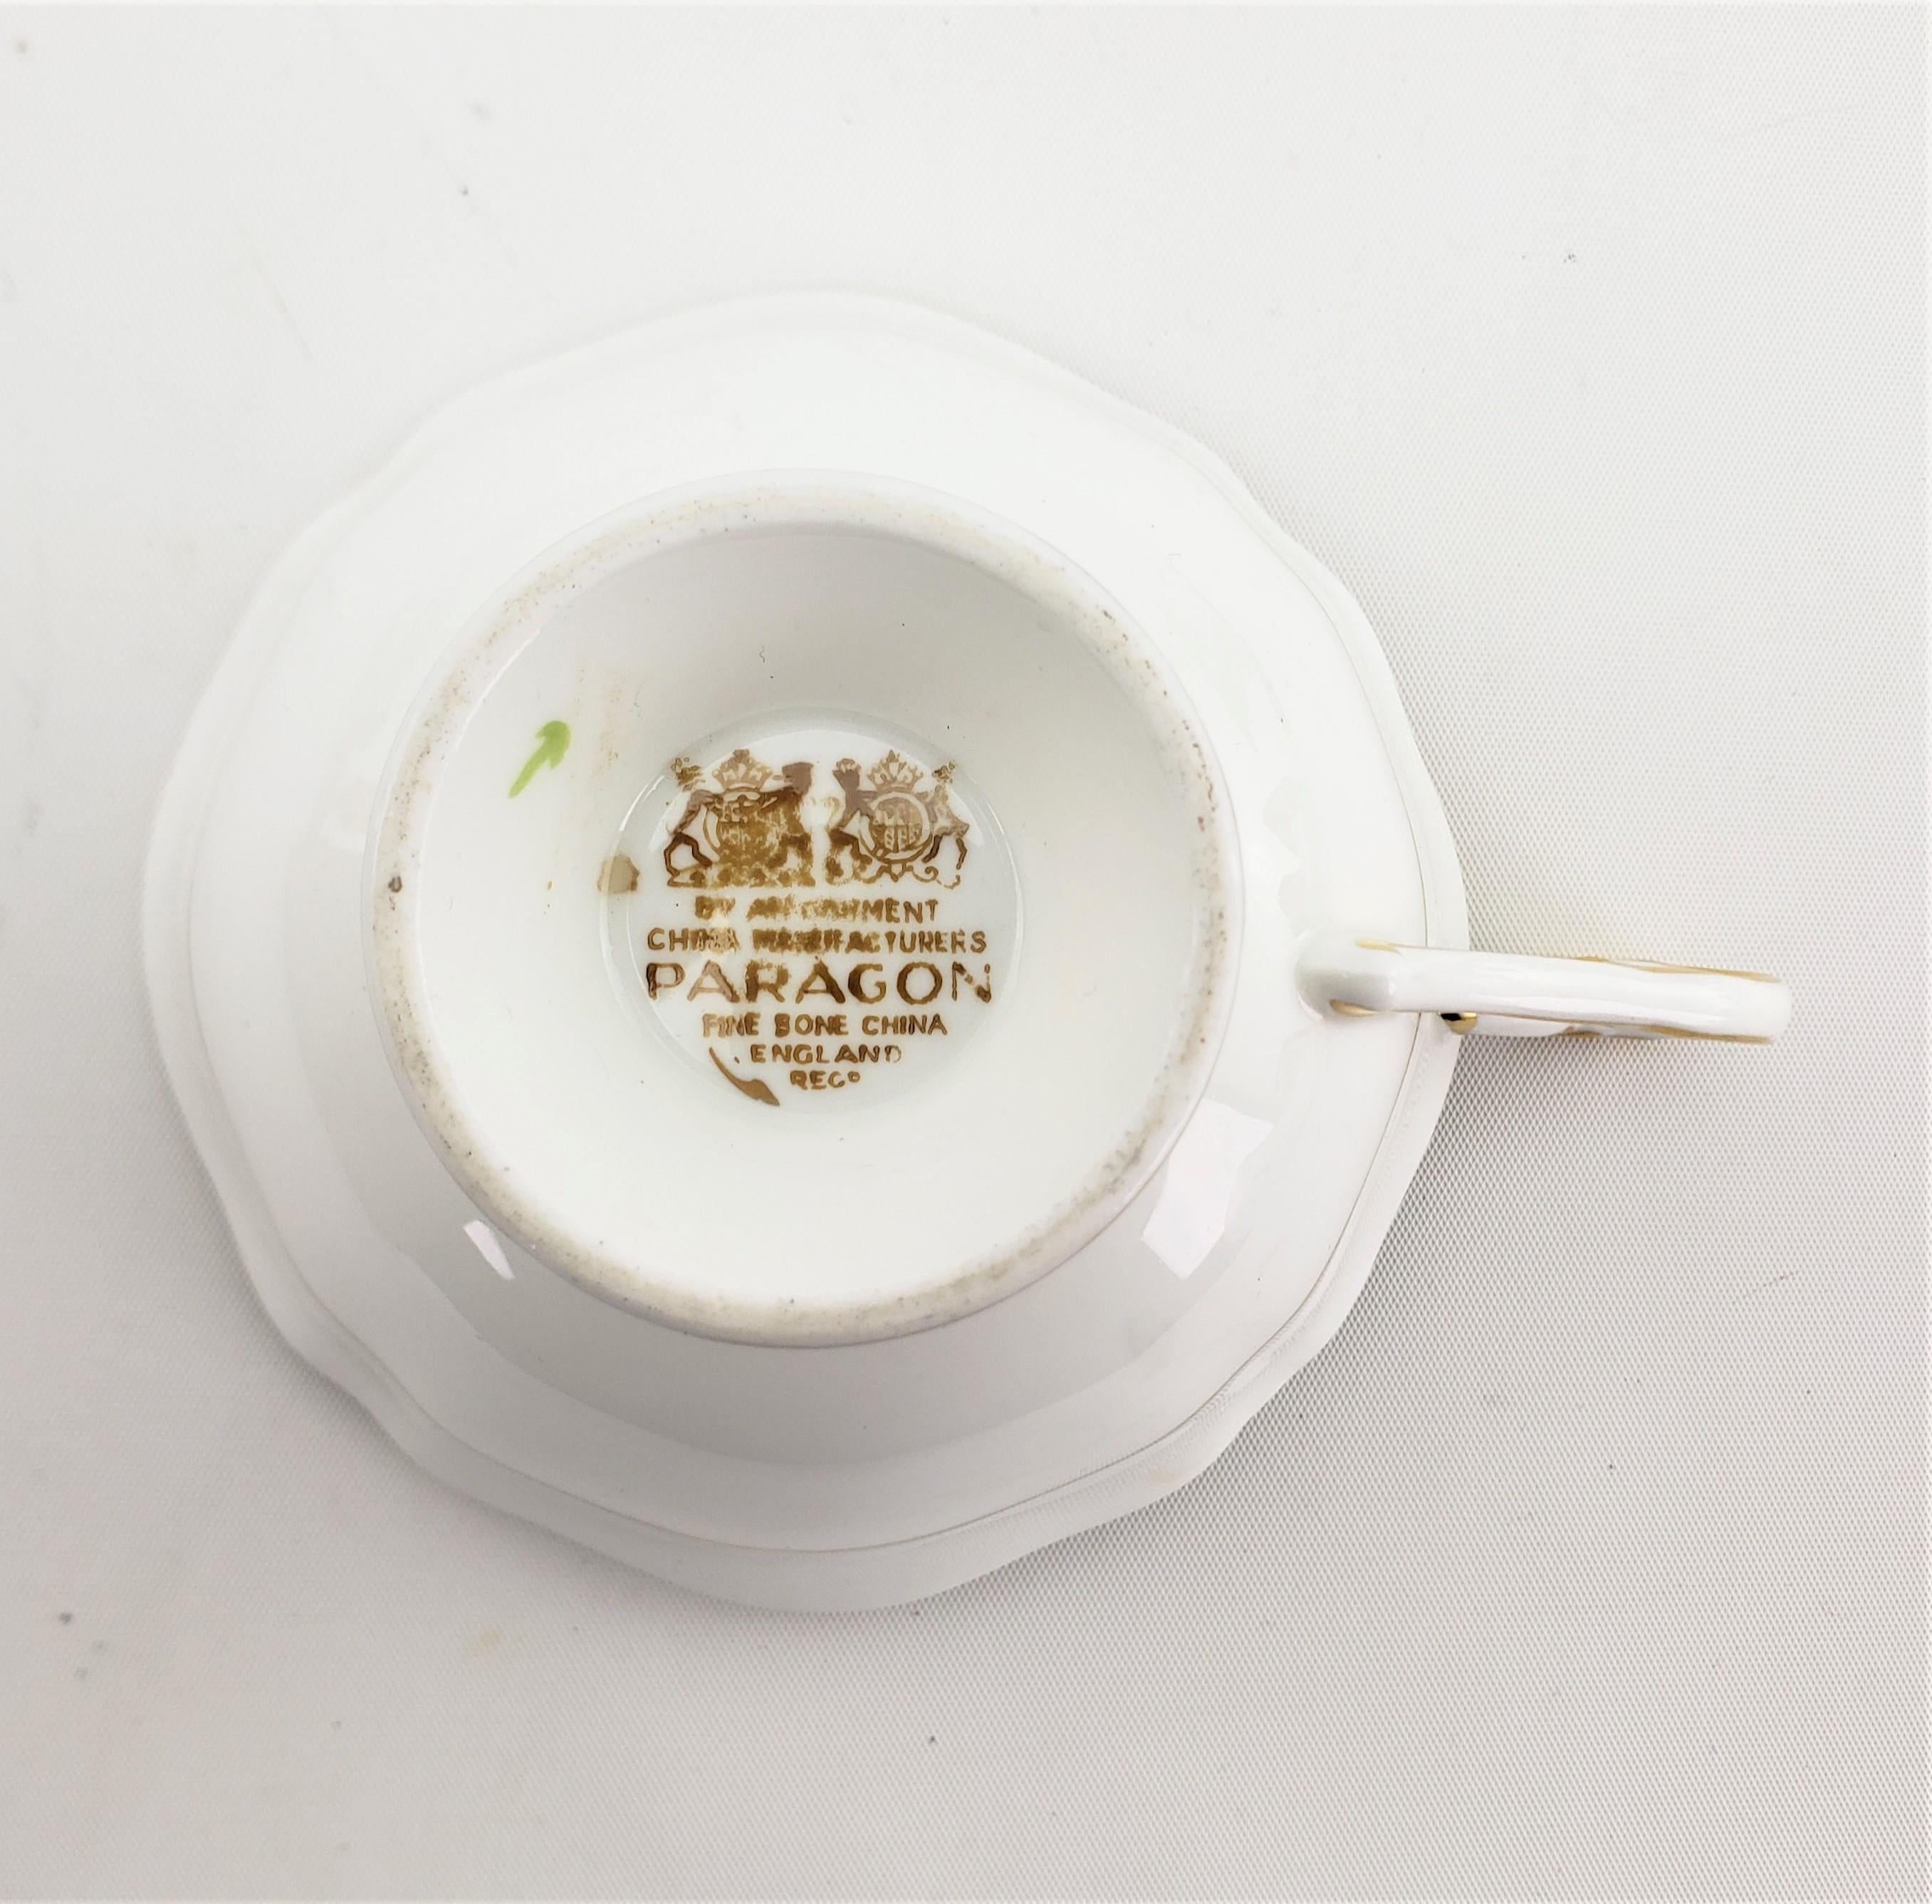 Vintage Paragon Double Warrant Bone China Teacup & Saucer with Floral Pattern In Good Condition For Sale In Hamilton, Ontario